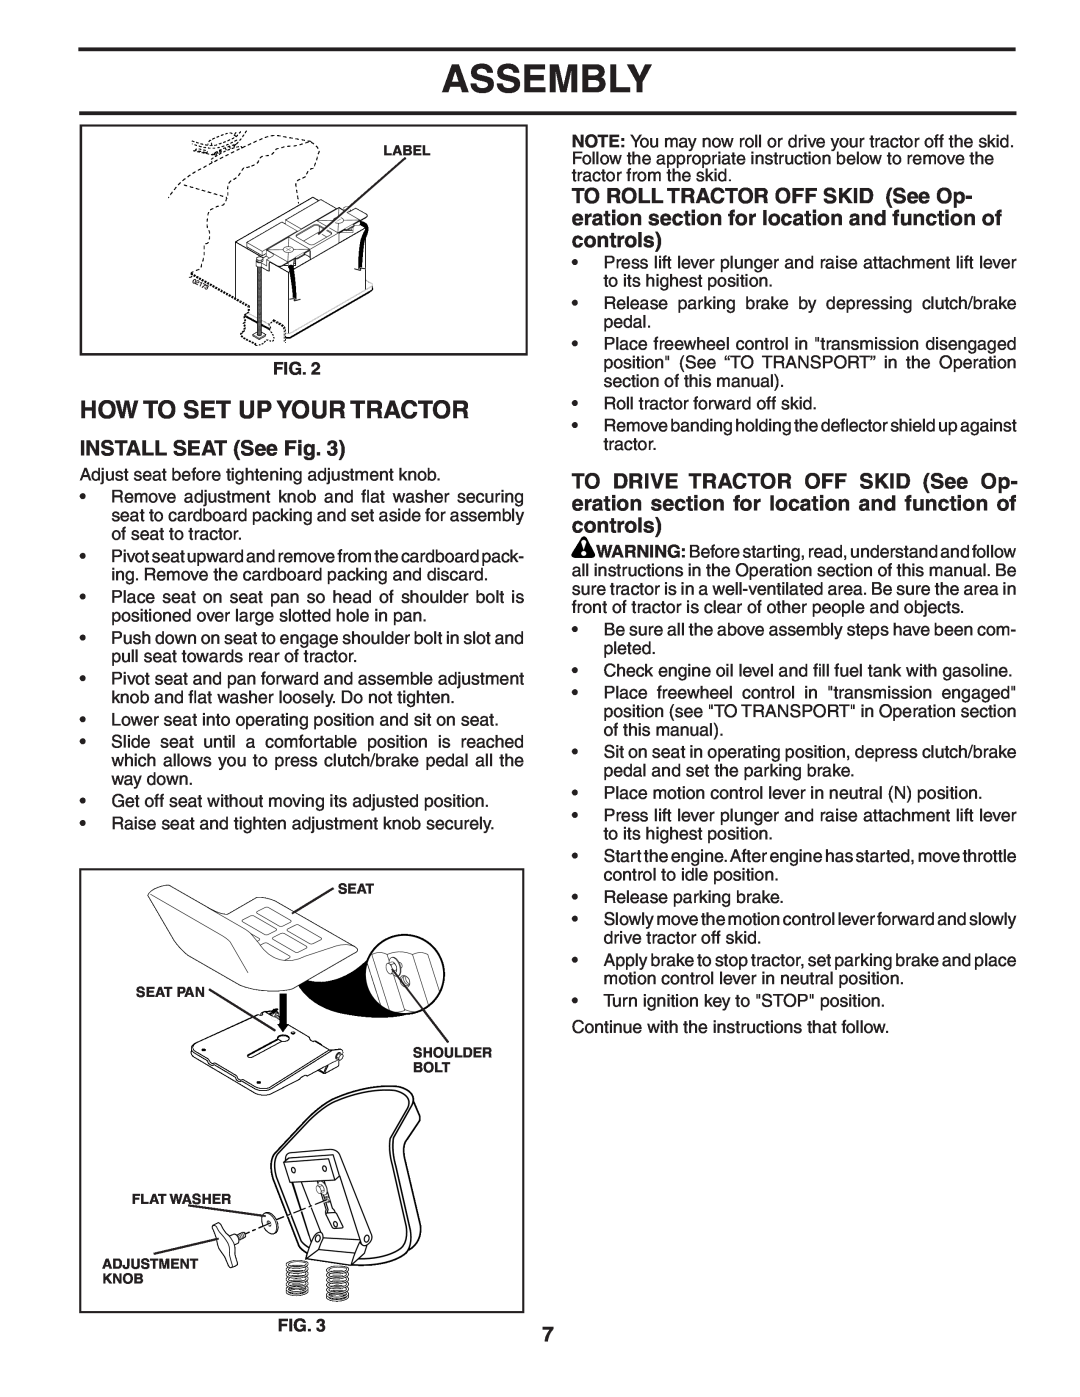 Poulan 188781 owner manual INSTALL SEAT See Fig, Assembly, How To Set Up Your Tractor 